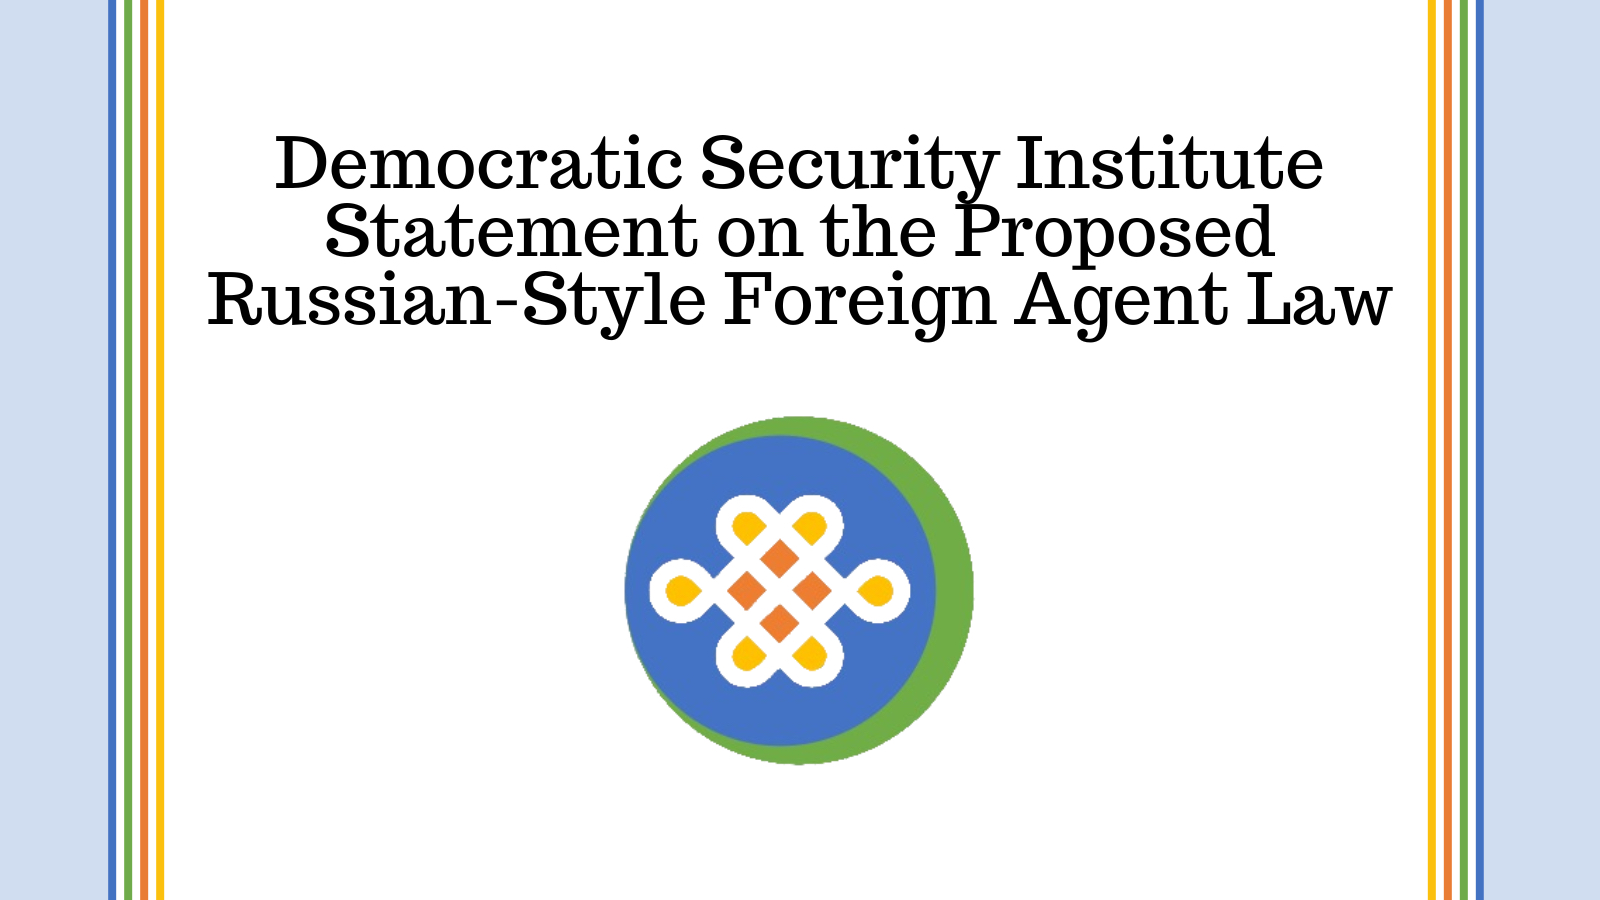 Democratic Security Institute Statement on the Proposed Russian-Style Foreign Agent Law